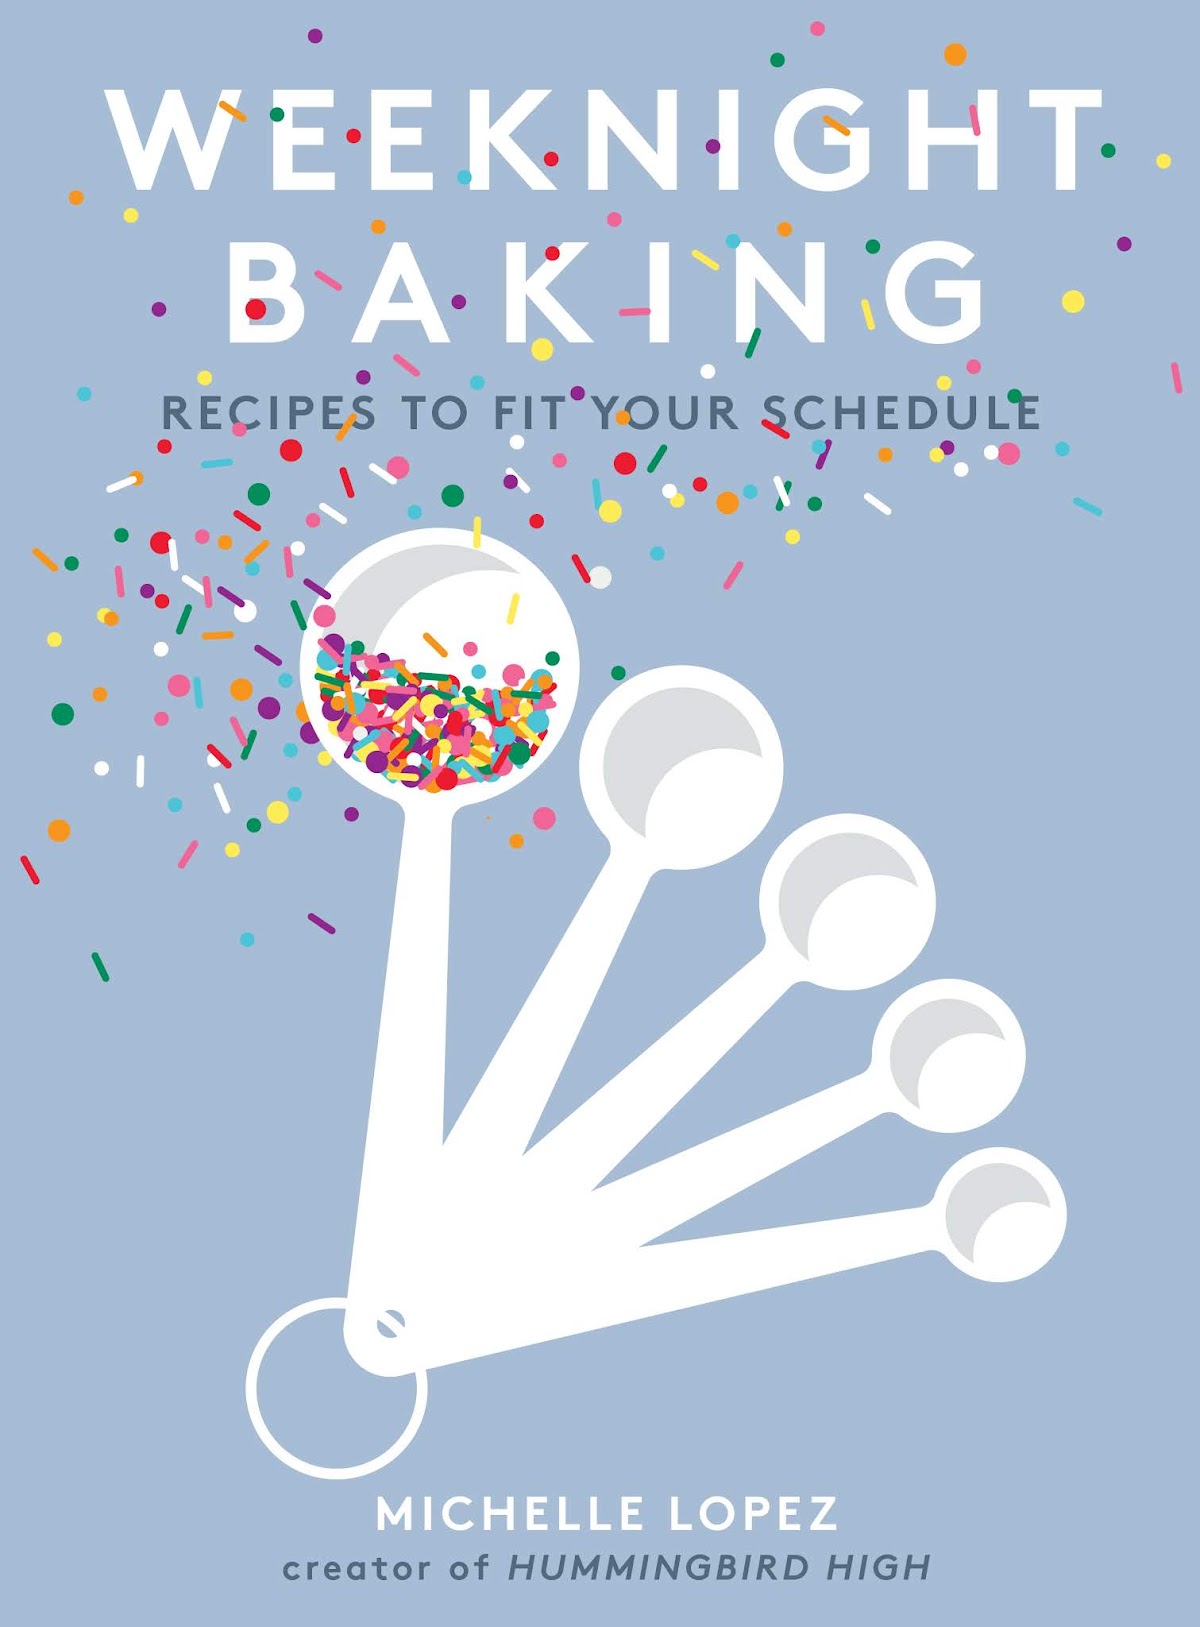 how to write a cookbook: designing the front cover of #weeknightbakingbook